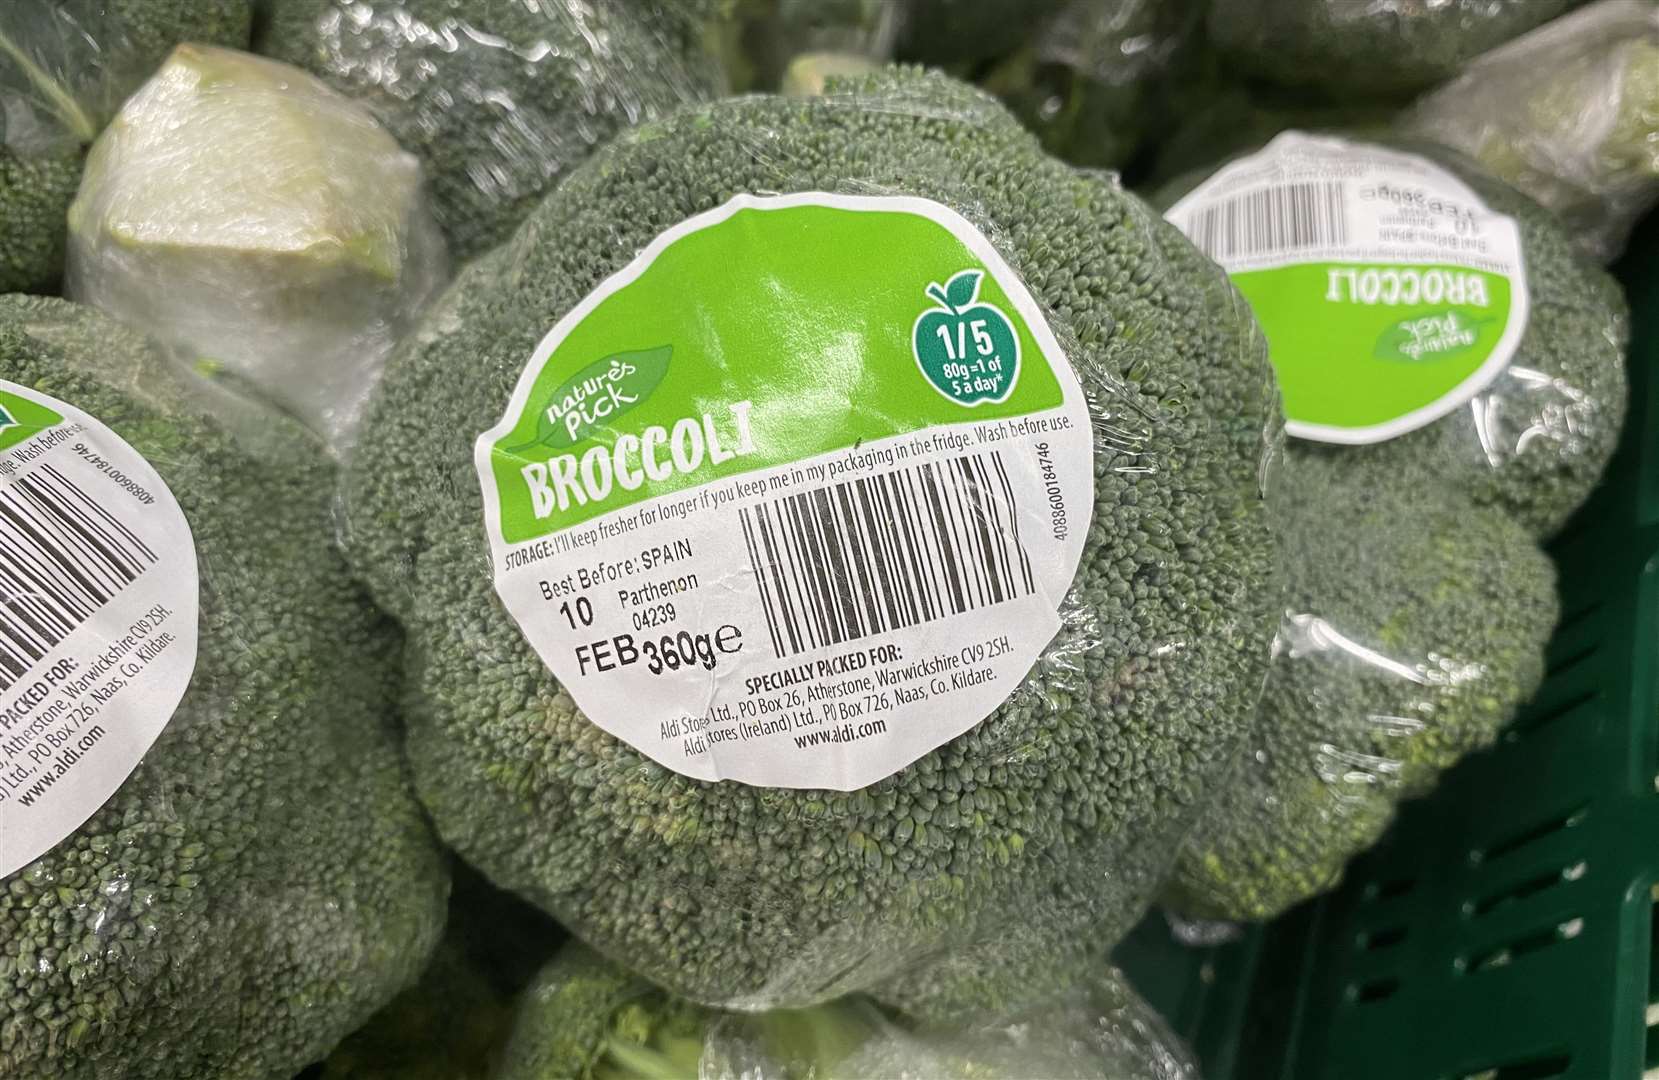 The supermarket was also selling broccoli that had been shipped from Spain